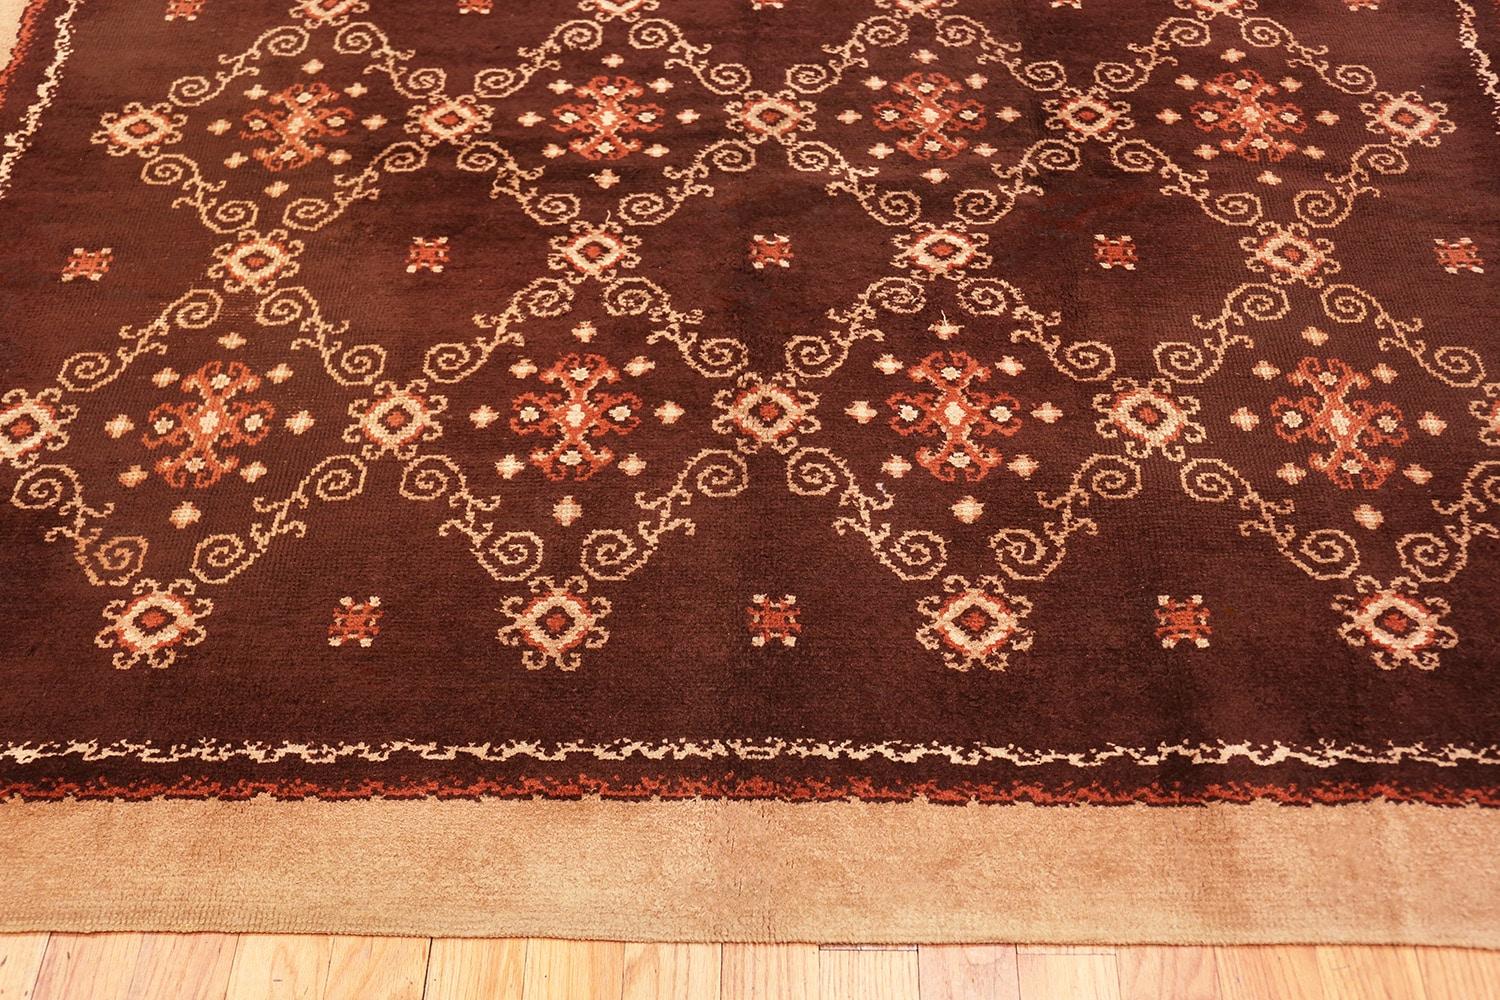 Art Deco carpet by Kinheim, country of origin: France, circa 1920. Size: 7 ft. 4 in x 10 ft. (2.24 m x 3.05 m)

Elegant simplicity defines this antique carpet, allowing the bold, yet subtle movements to speak for themselves amidst the collection of